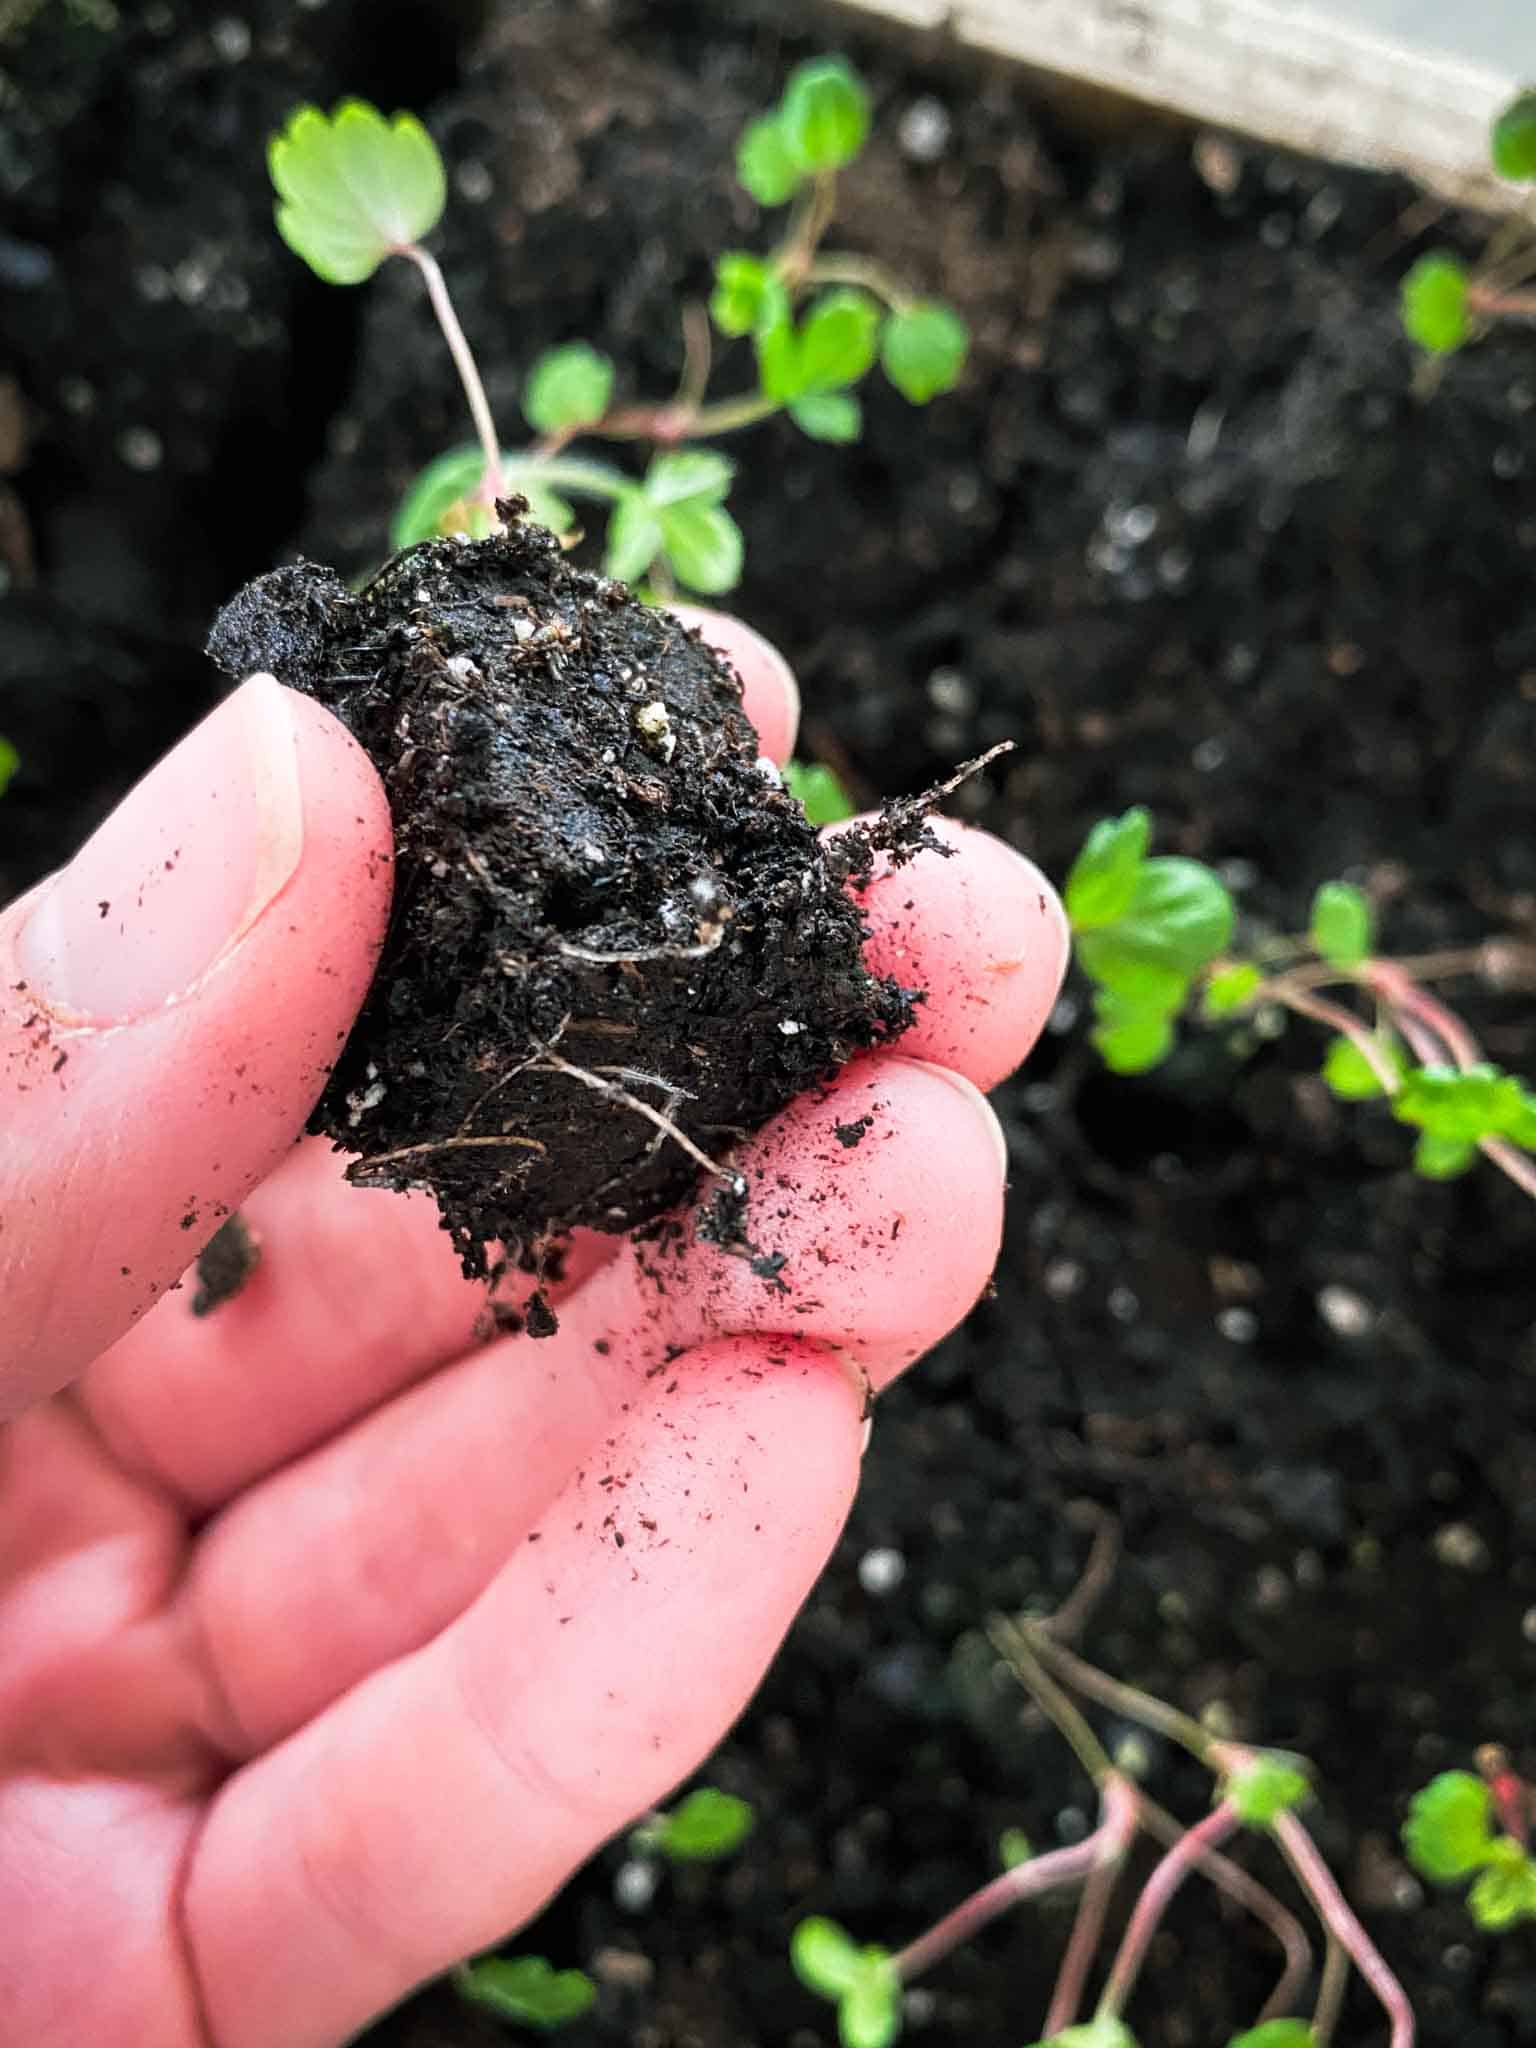 Strawberries sown into a small soil block with healthy roots pushing out.